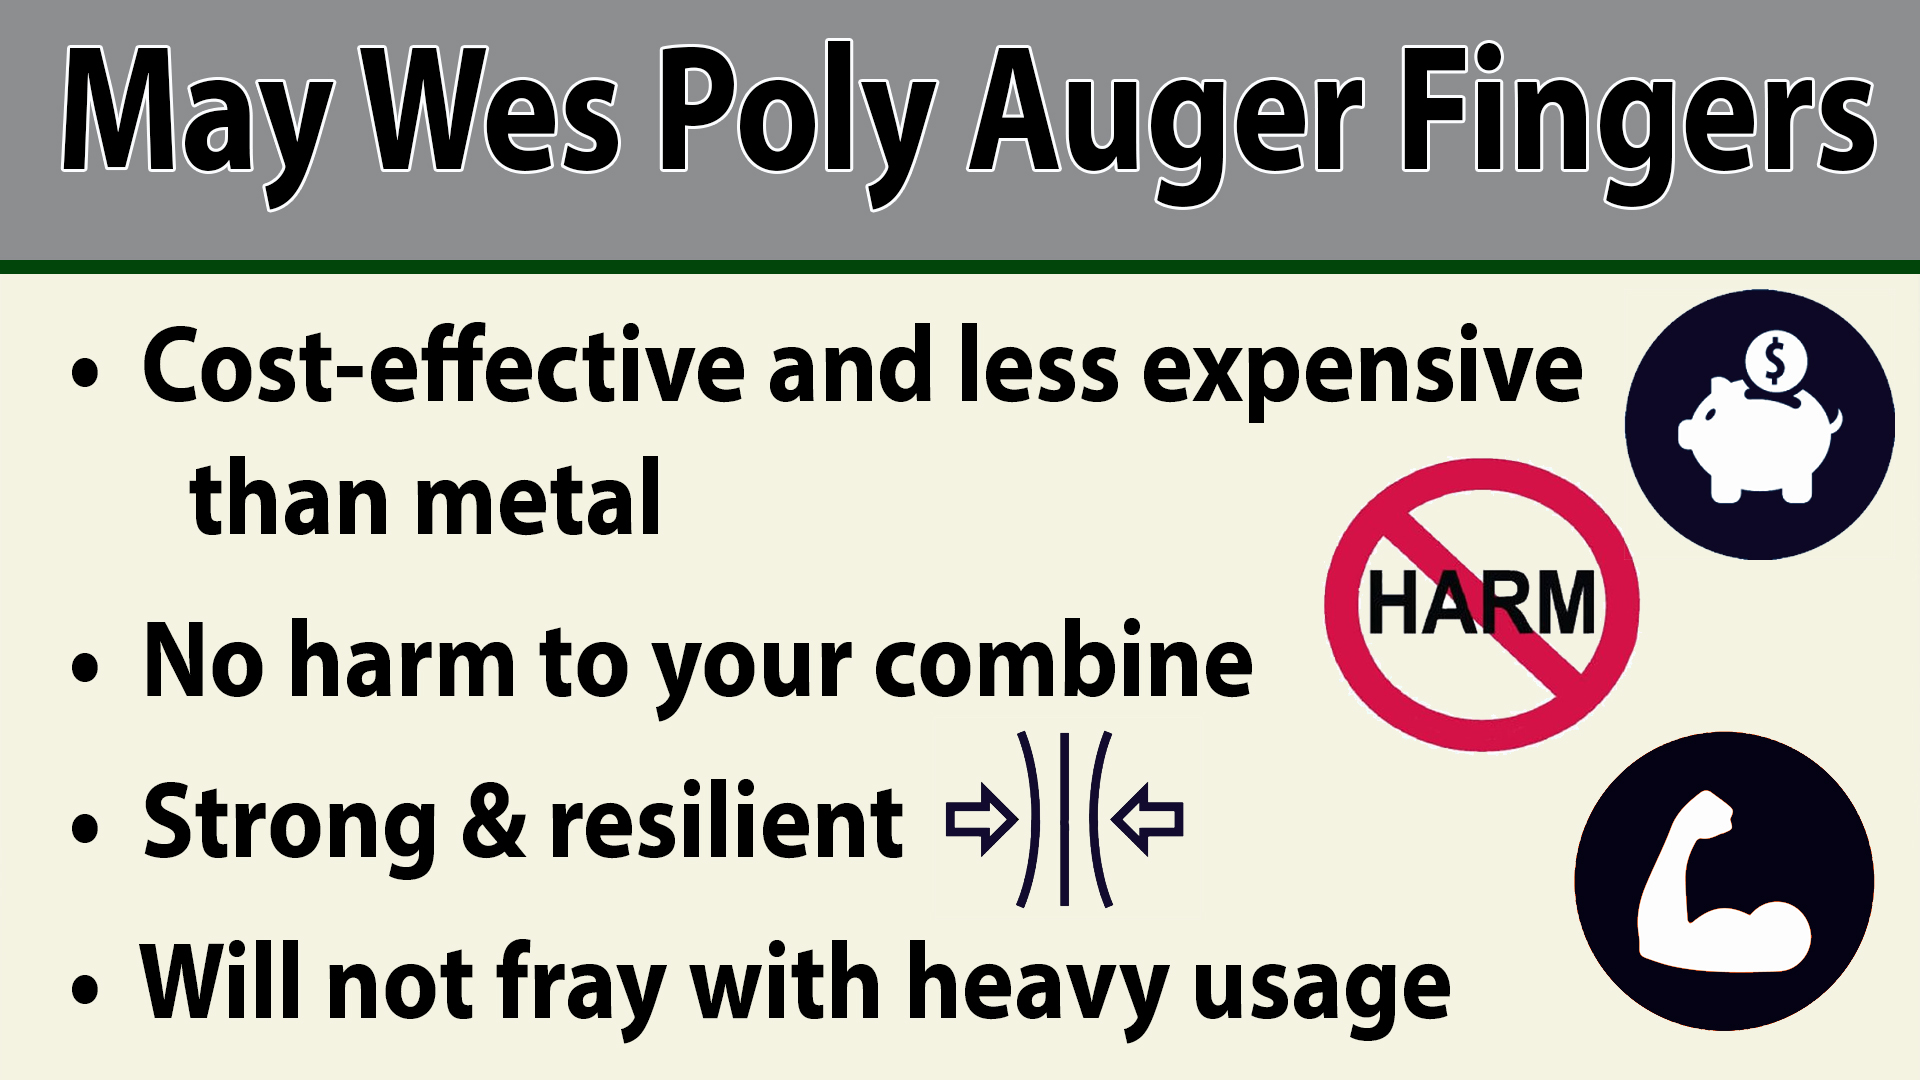 may-wes-poly-auger-fingers-marketing-bullets